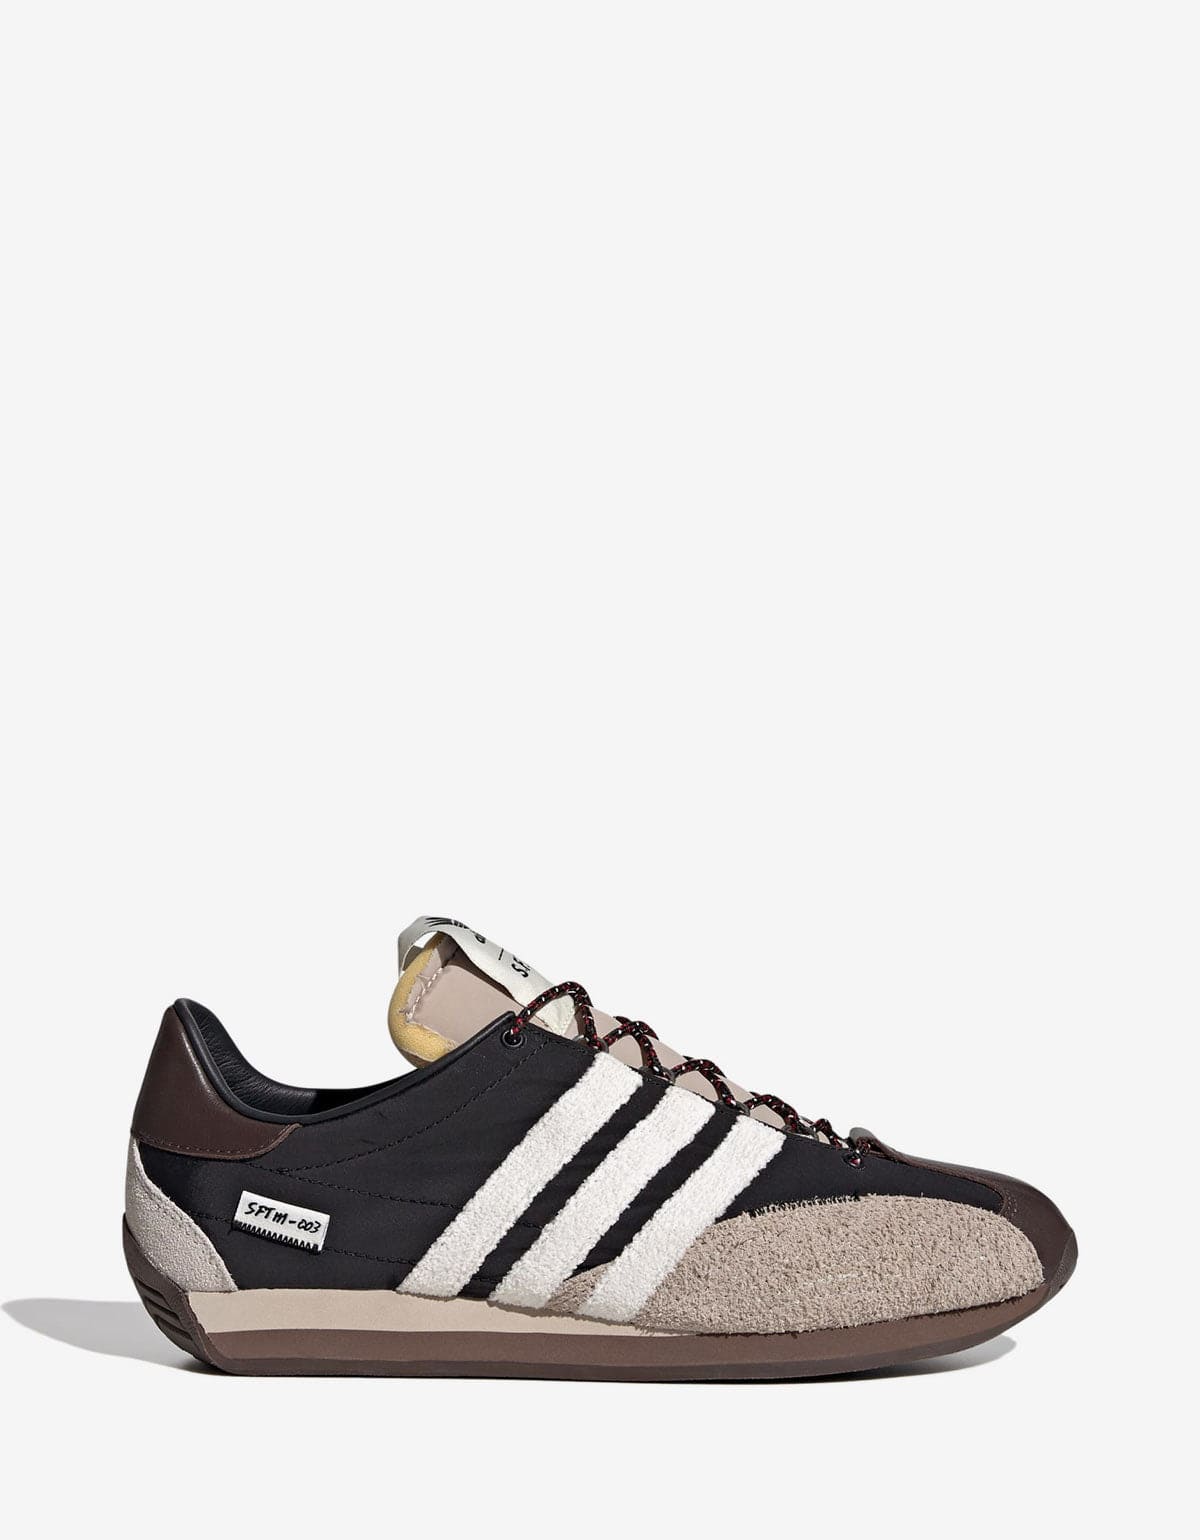 Song For The Mute x Adidas SFTM-003 Black Country OG Low Trainers